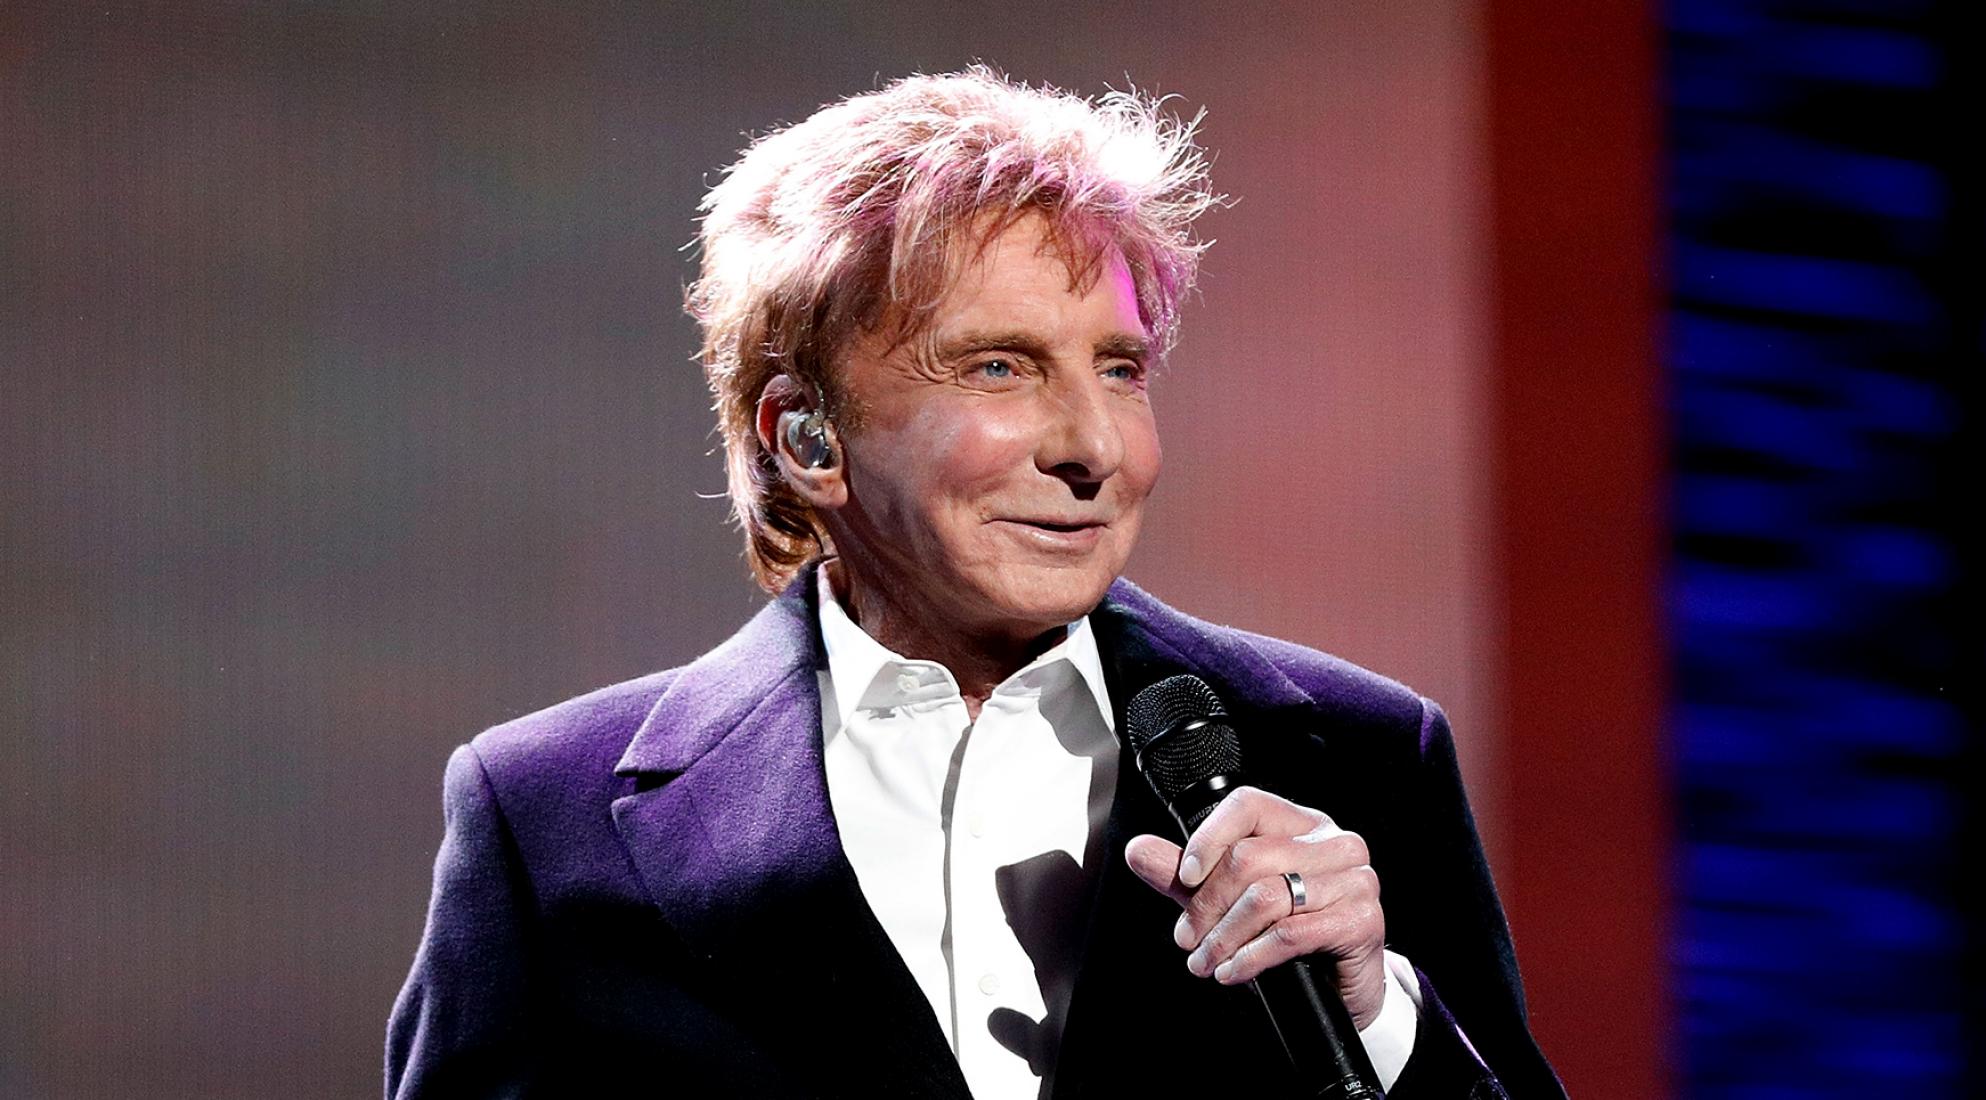 barry manilow - photo #17